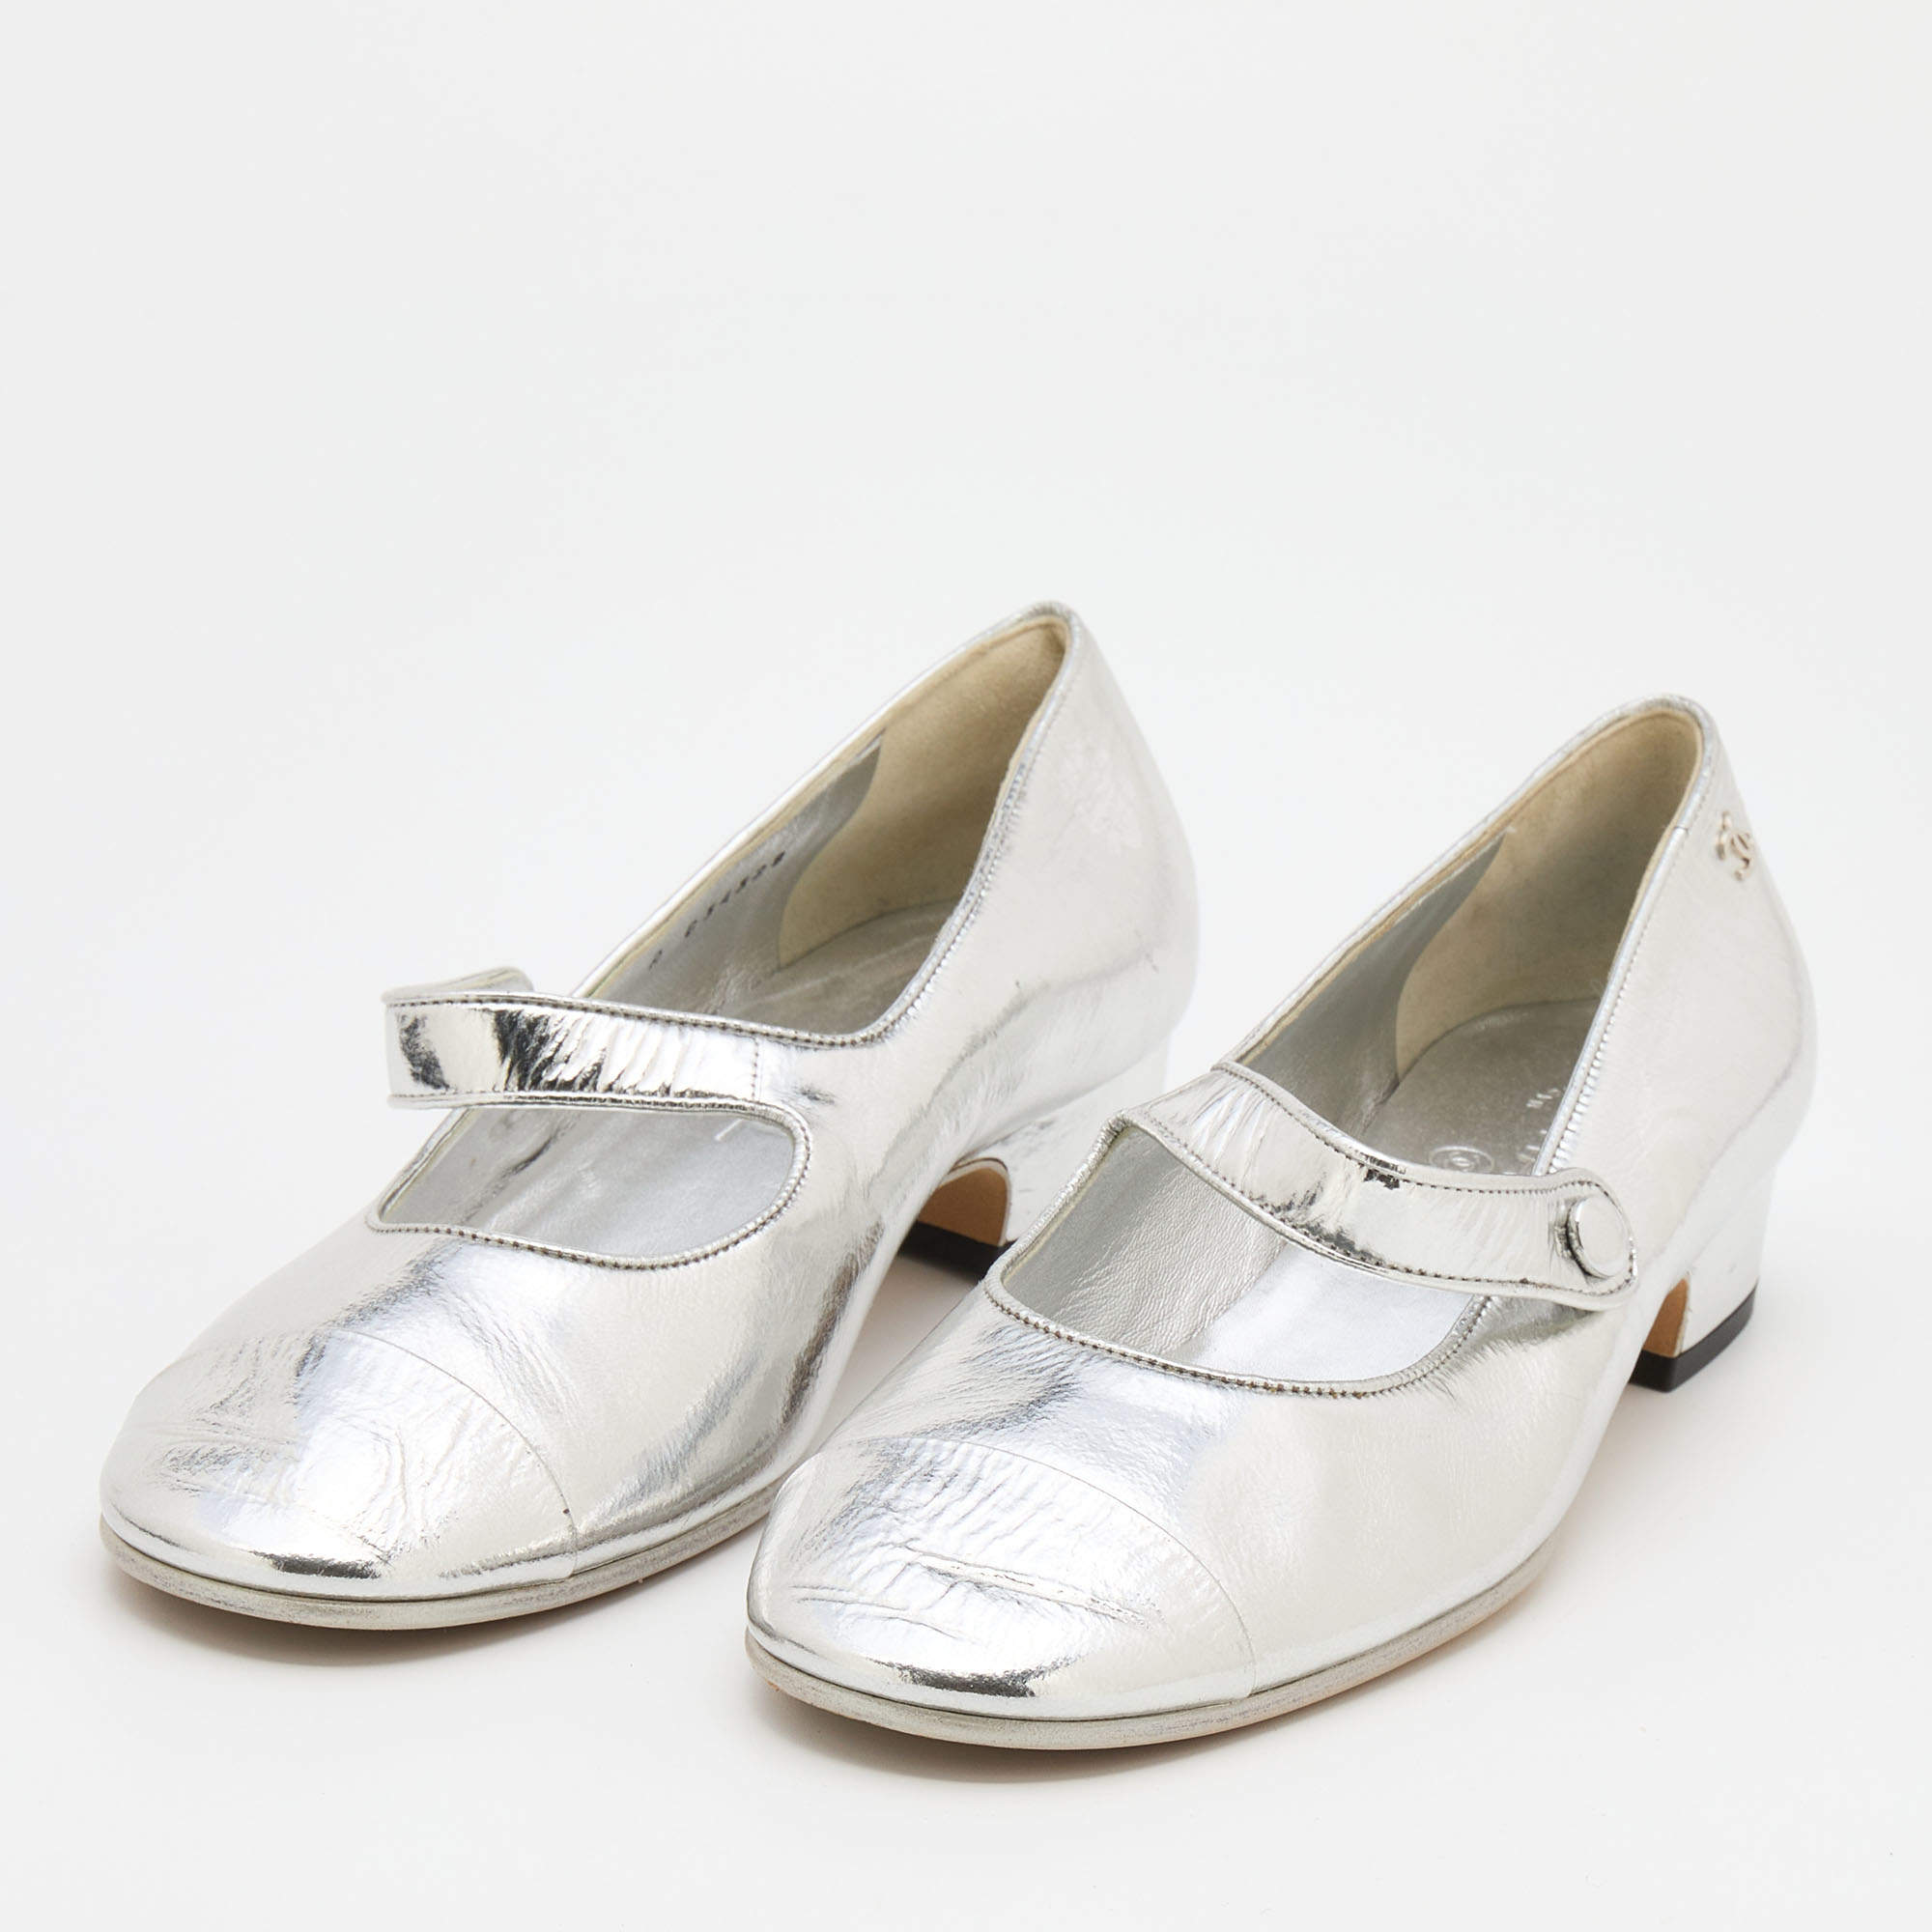 Chanel Metallic Silver Leather CC Cap Toe Mary Jane Pumps Size 38